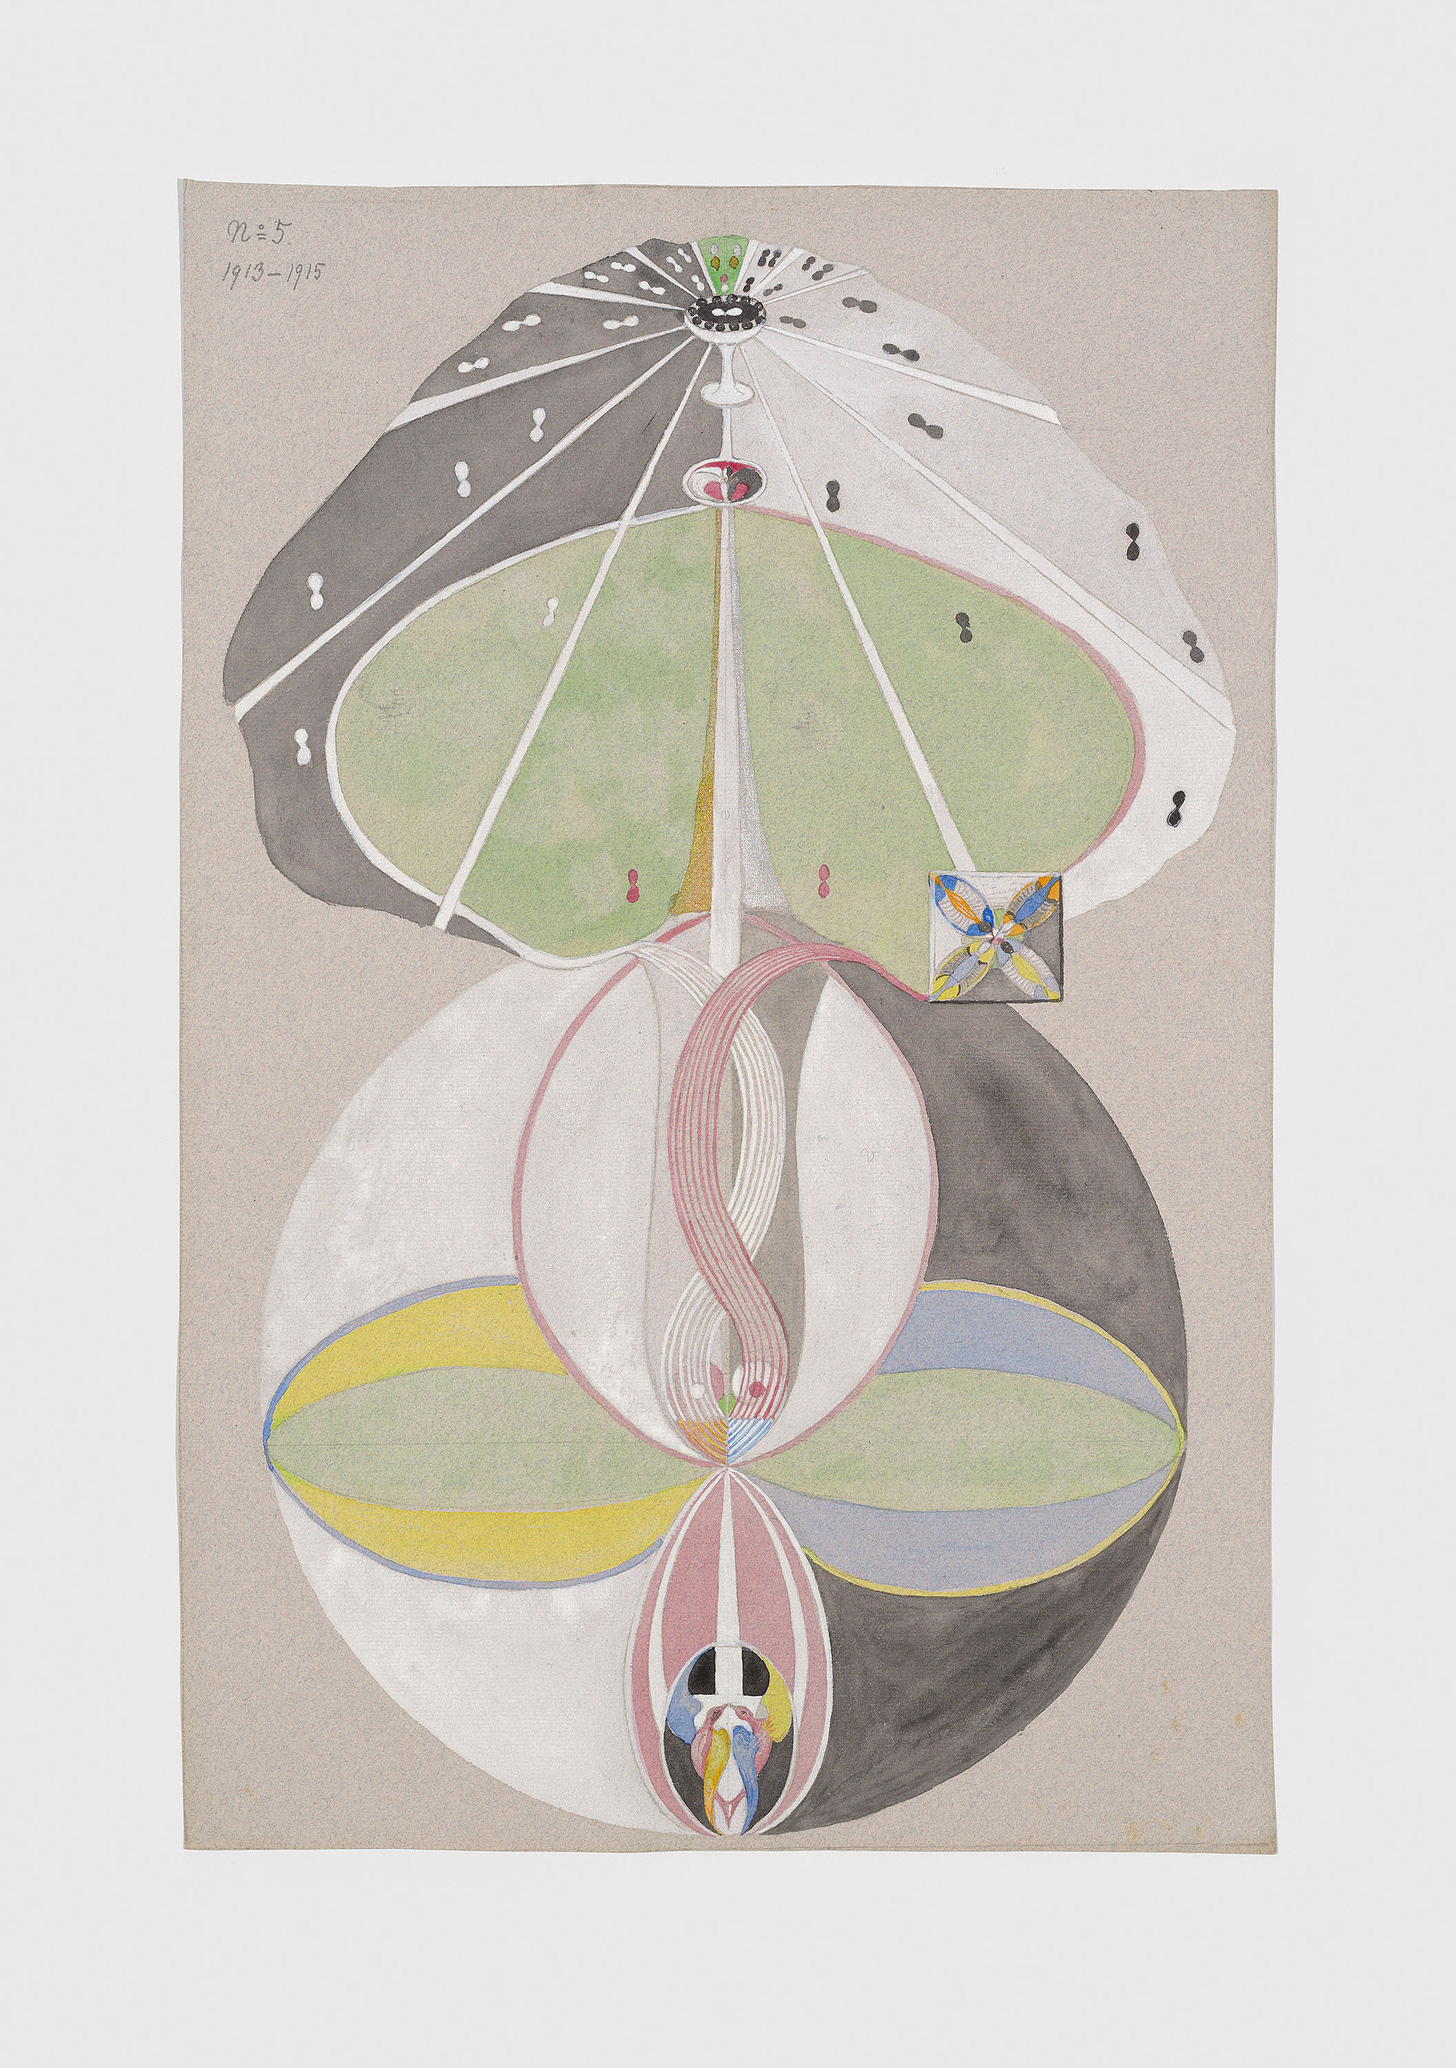 A rare set of Hilma af Klint watercolors is now on display at David Zwirner